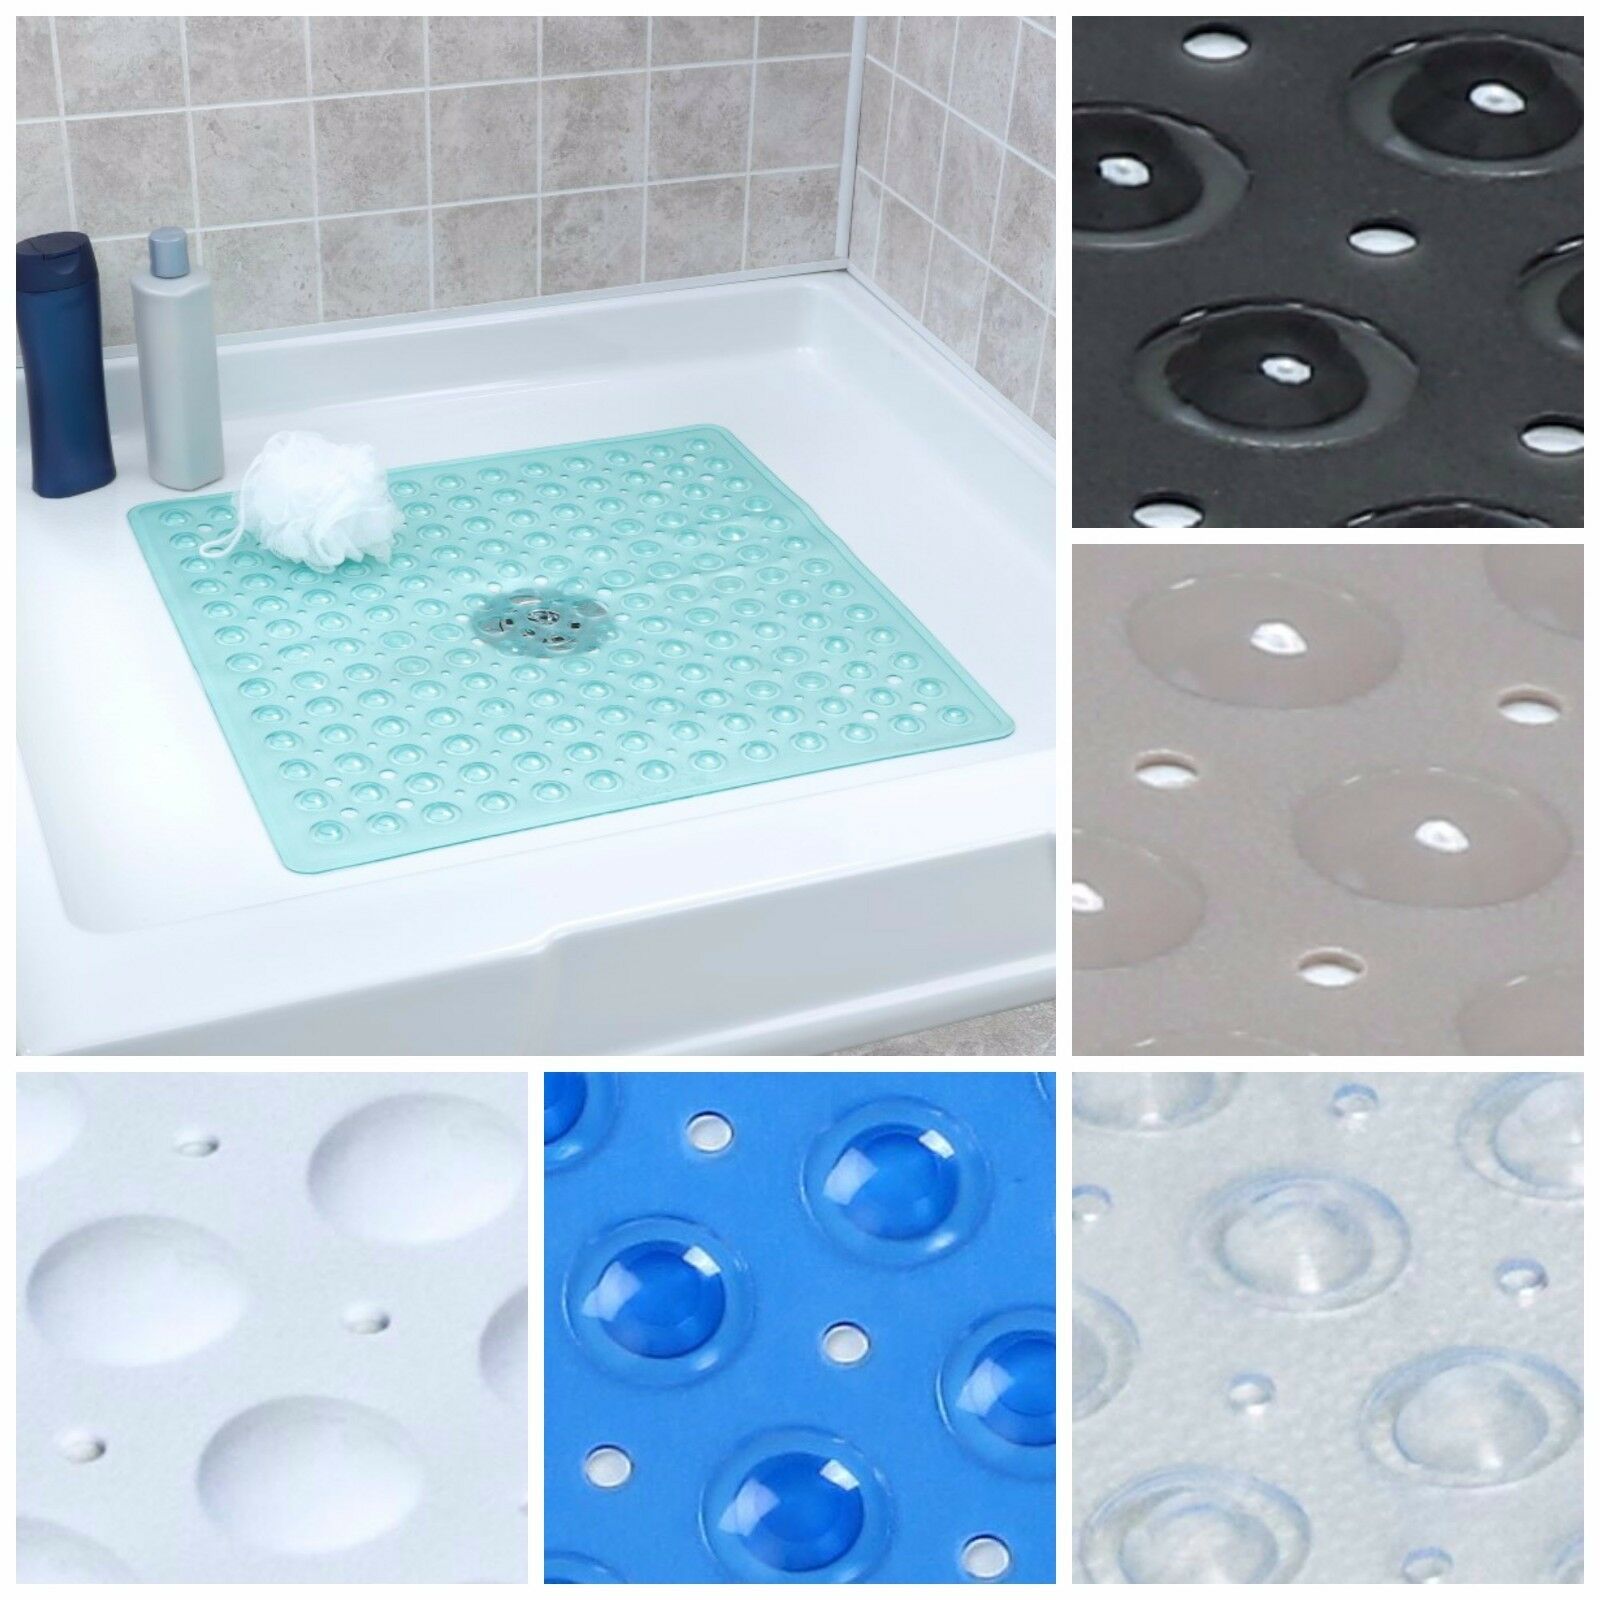 Large Non Slip Shower Mat With Drain Holes: Slipx Solutions Square Shower Mat